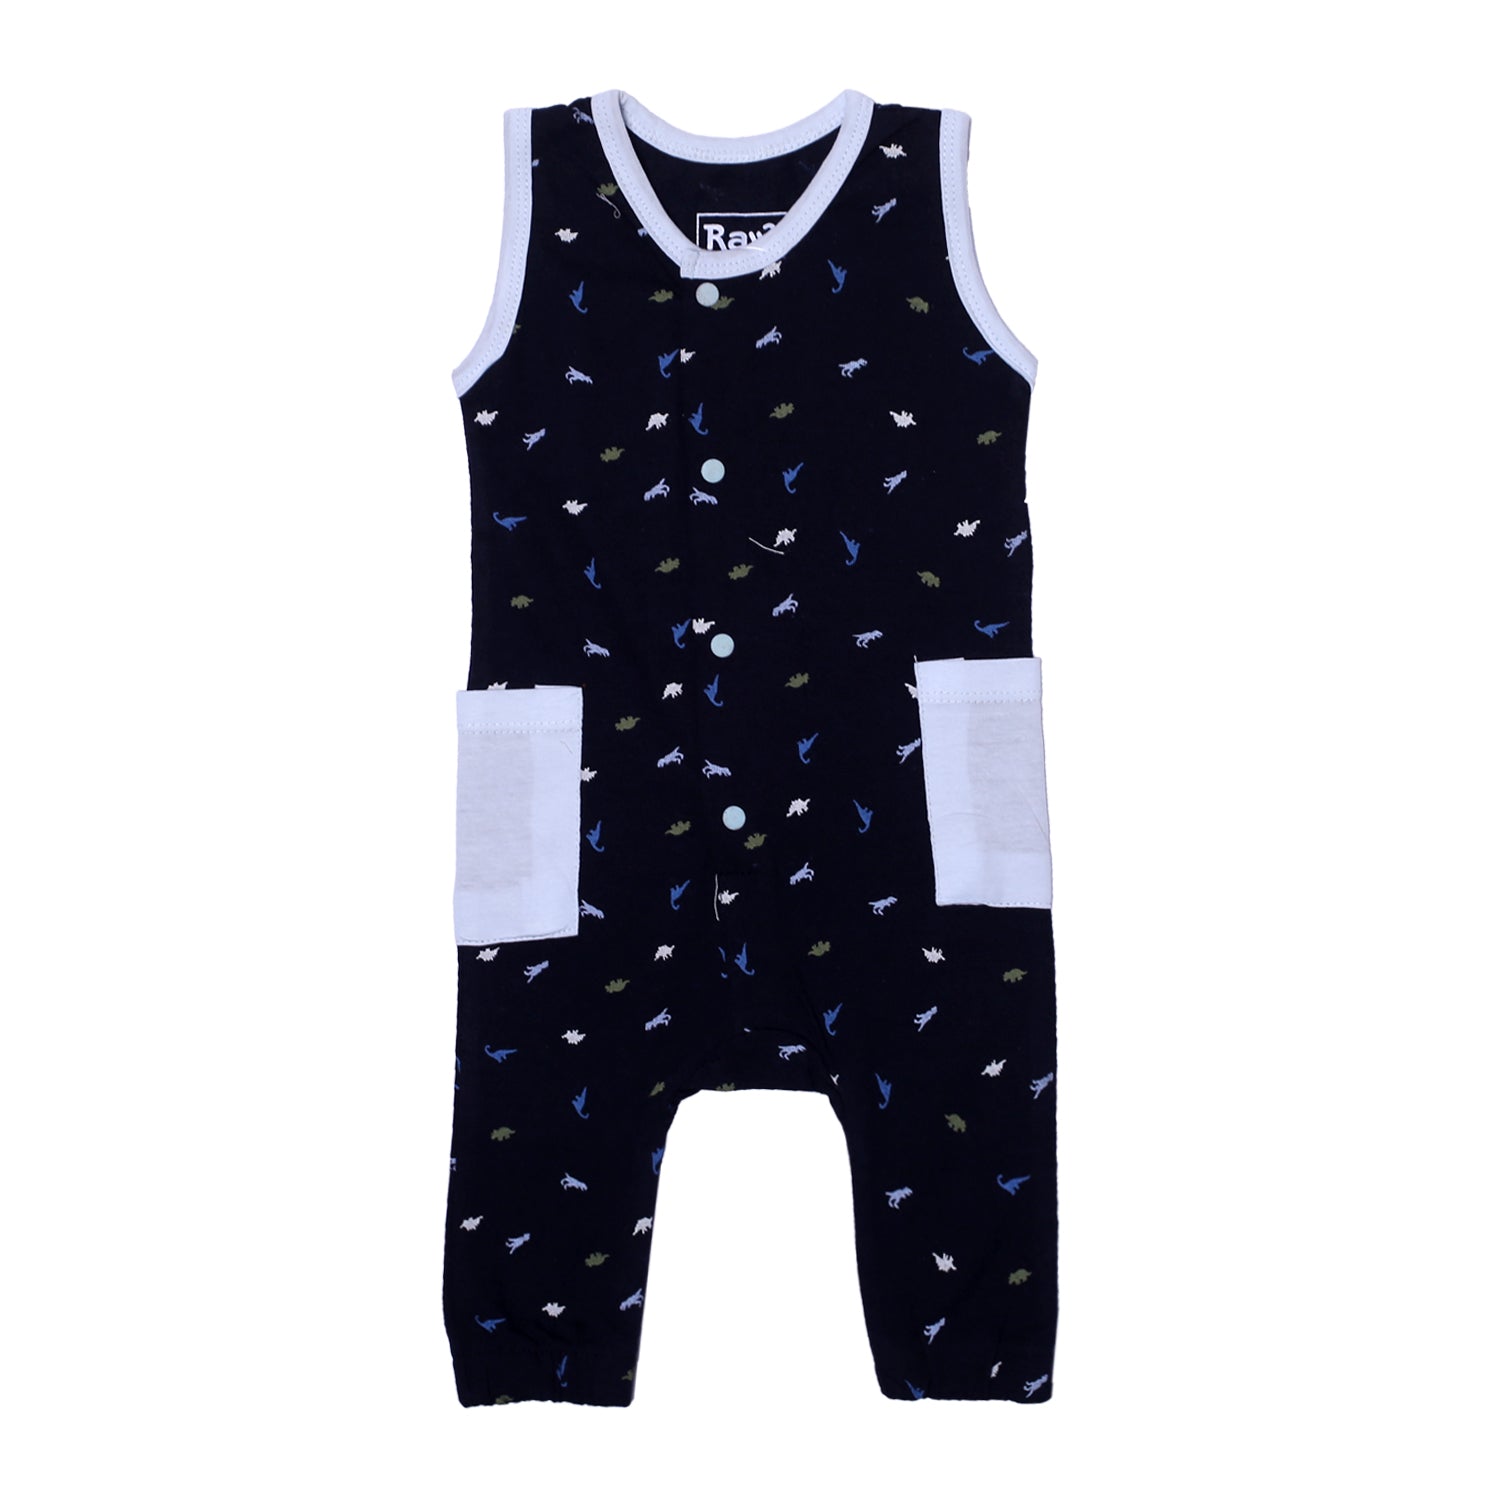 NAVY BLUE FULL BODY SLEEVE LESS DINO PRINTED WITH SKY BLUE POCKETS ROMPER